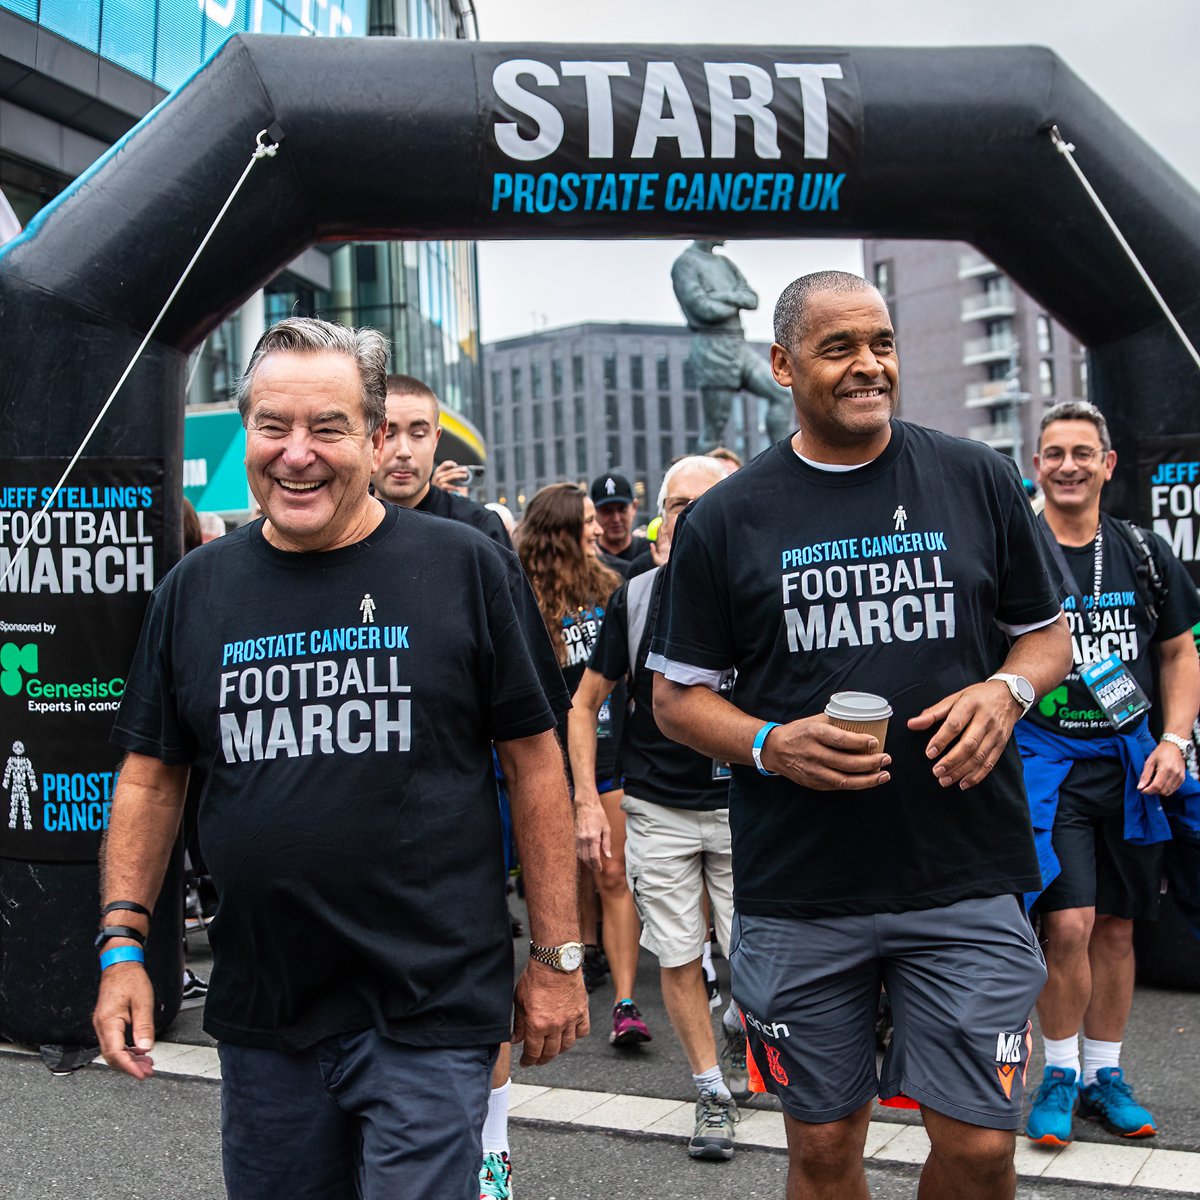 It’s #ThrowbackThursday and we're looking back on @JeffStelling’s Football March ⚽ The event was held earlier this year in honour of the late great Bill Turnbull. If you joined us, please share your highlights below ⤵️ #JeffsMarch | @GenesisCare